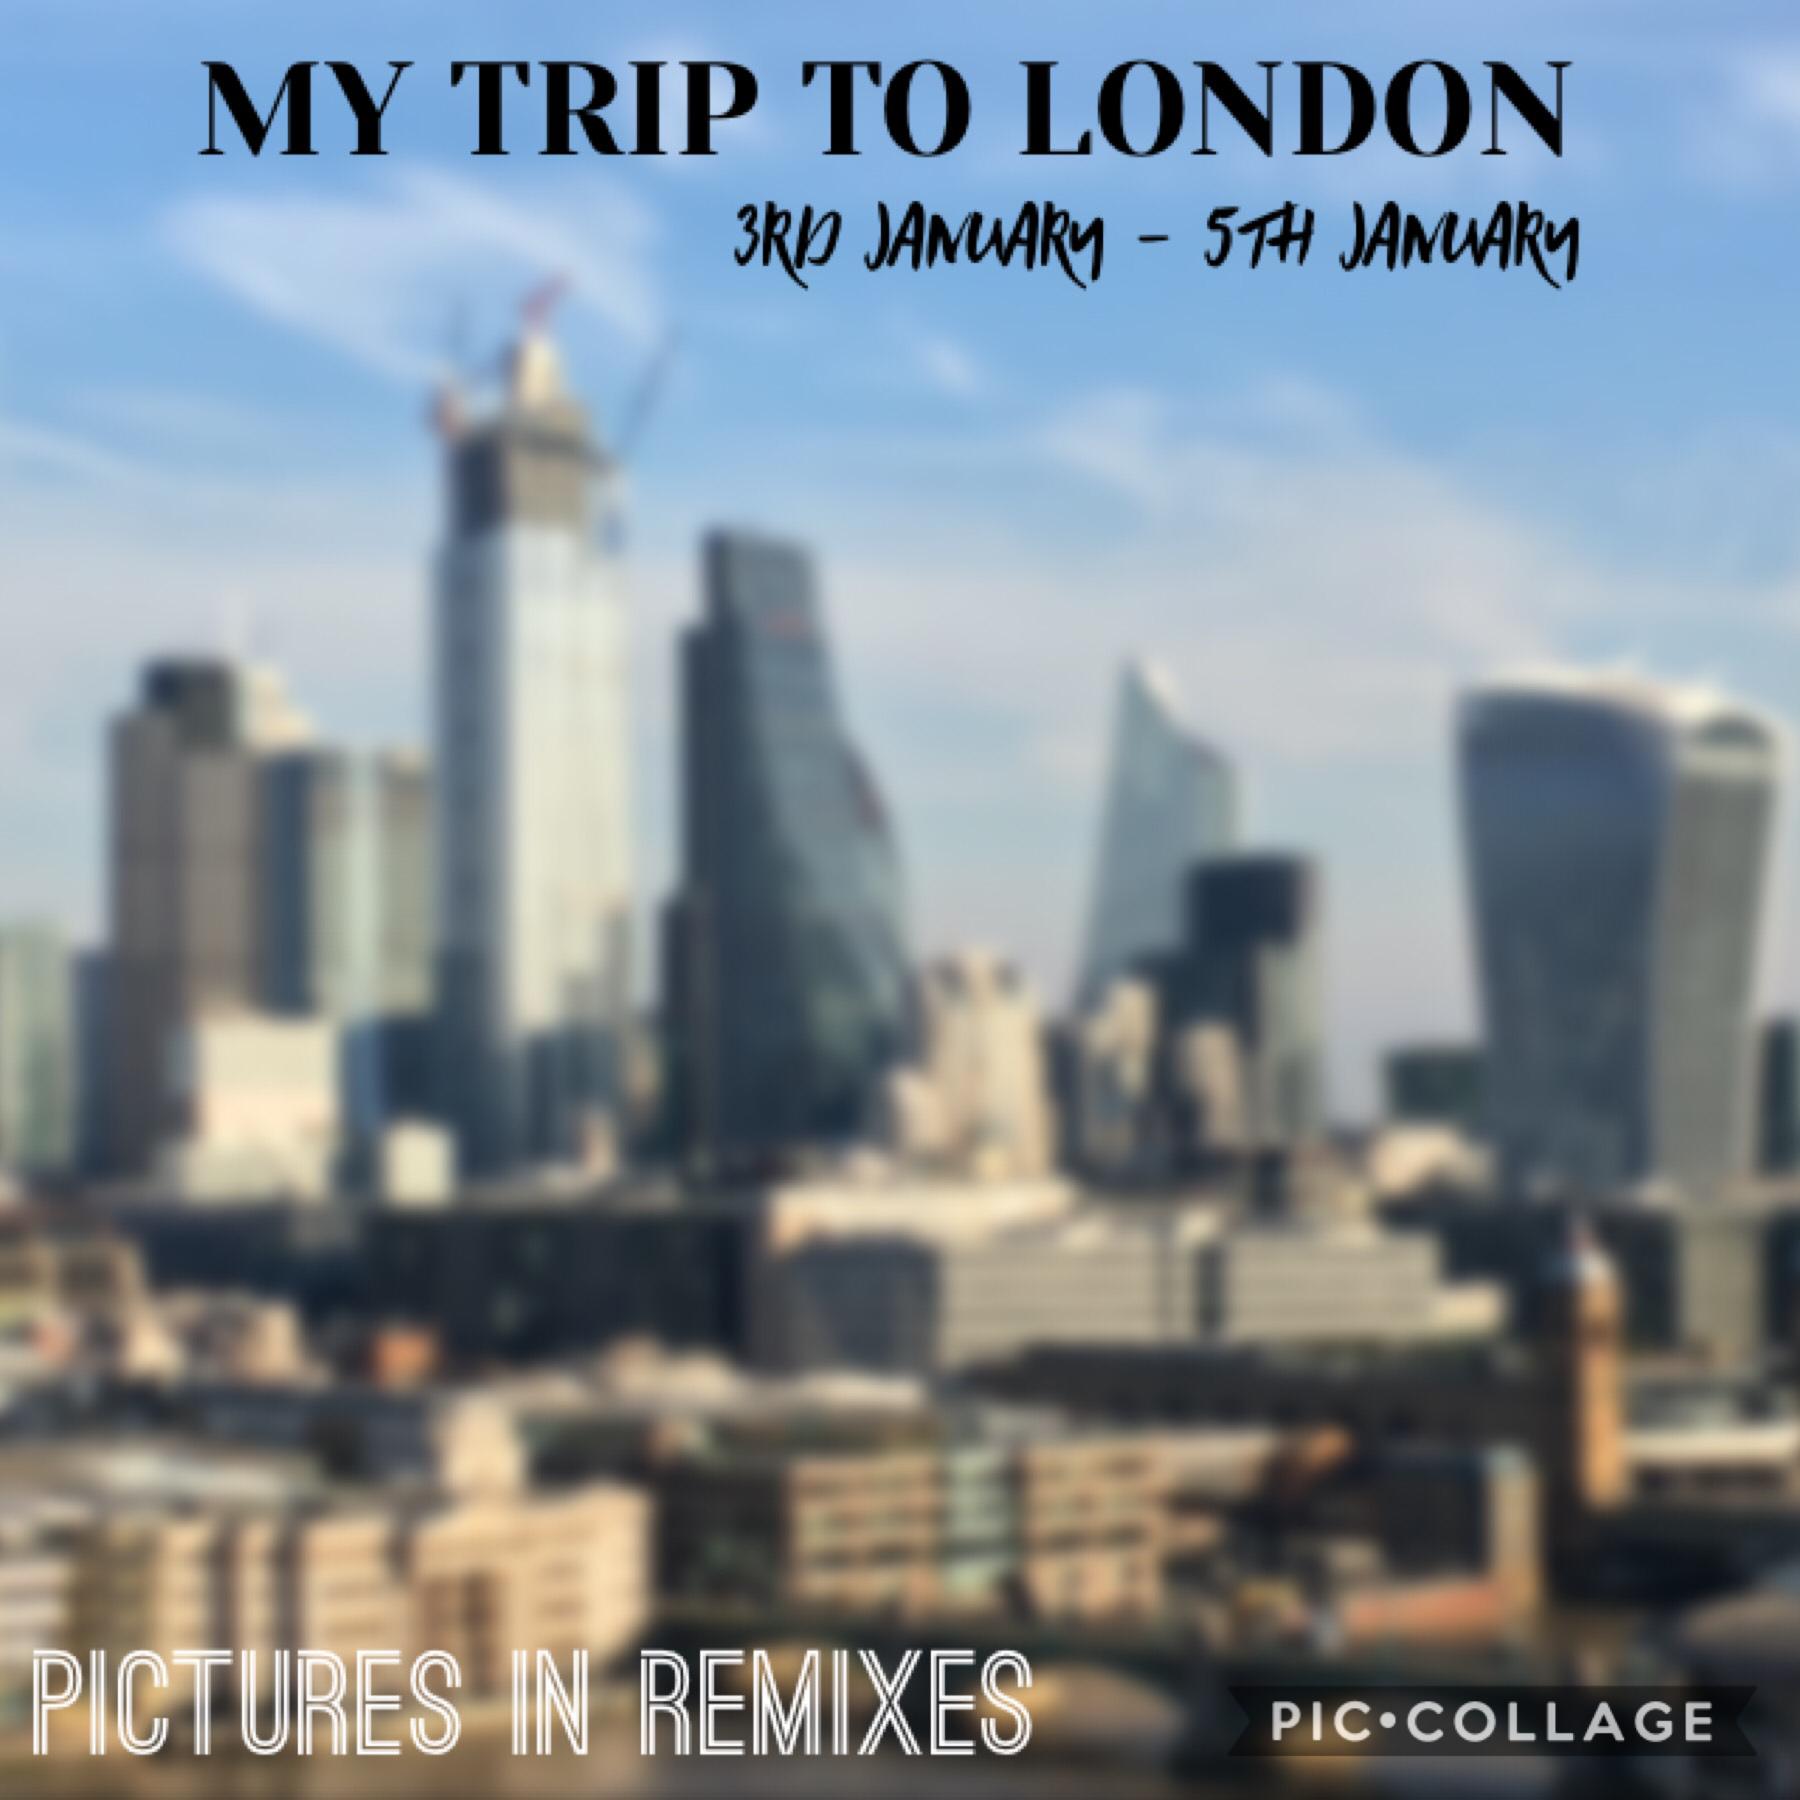 My trip to London Blog! Pictures in remixes! 🏙